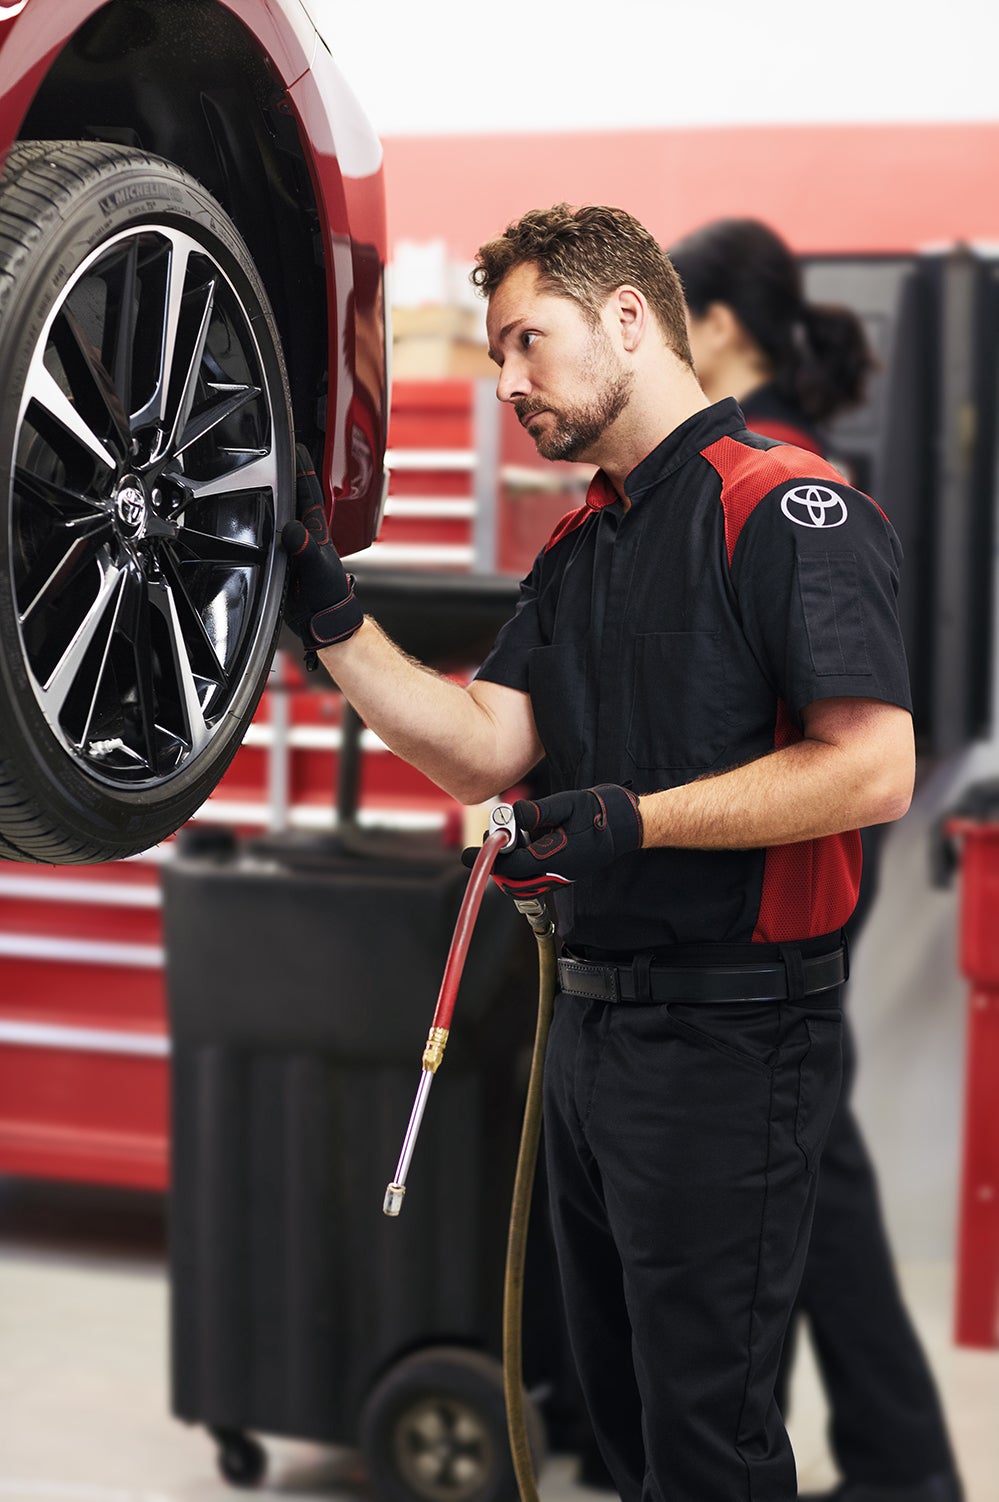 Bennett Toyota of Allentown is a Car Dealership near Fogelsville, PA | Toyota mechanic checking tires on a Toyota vehicle